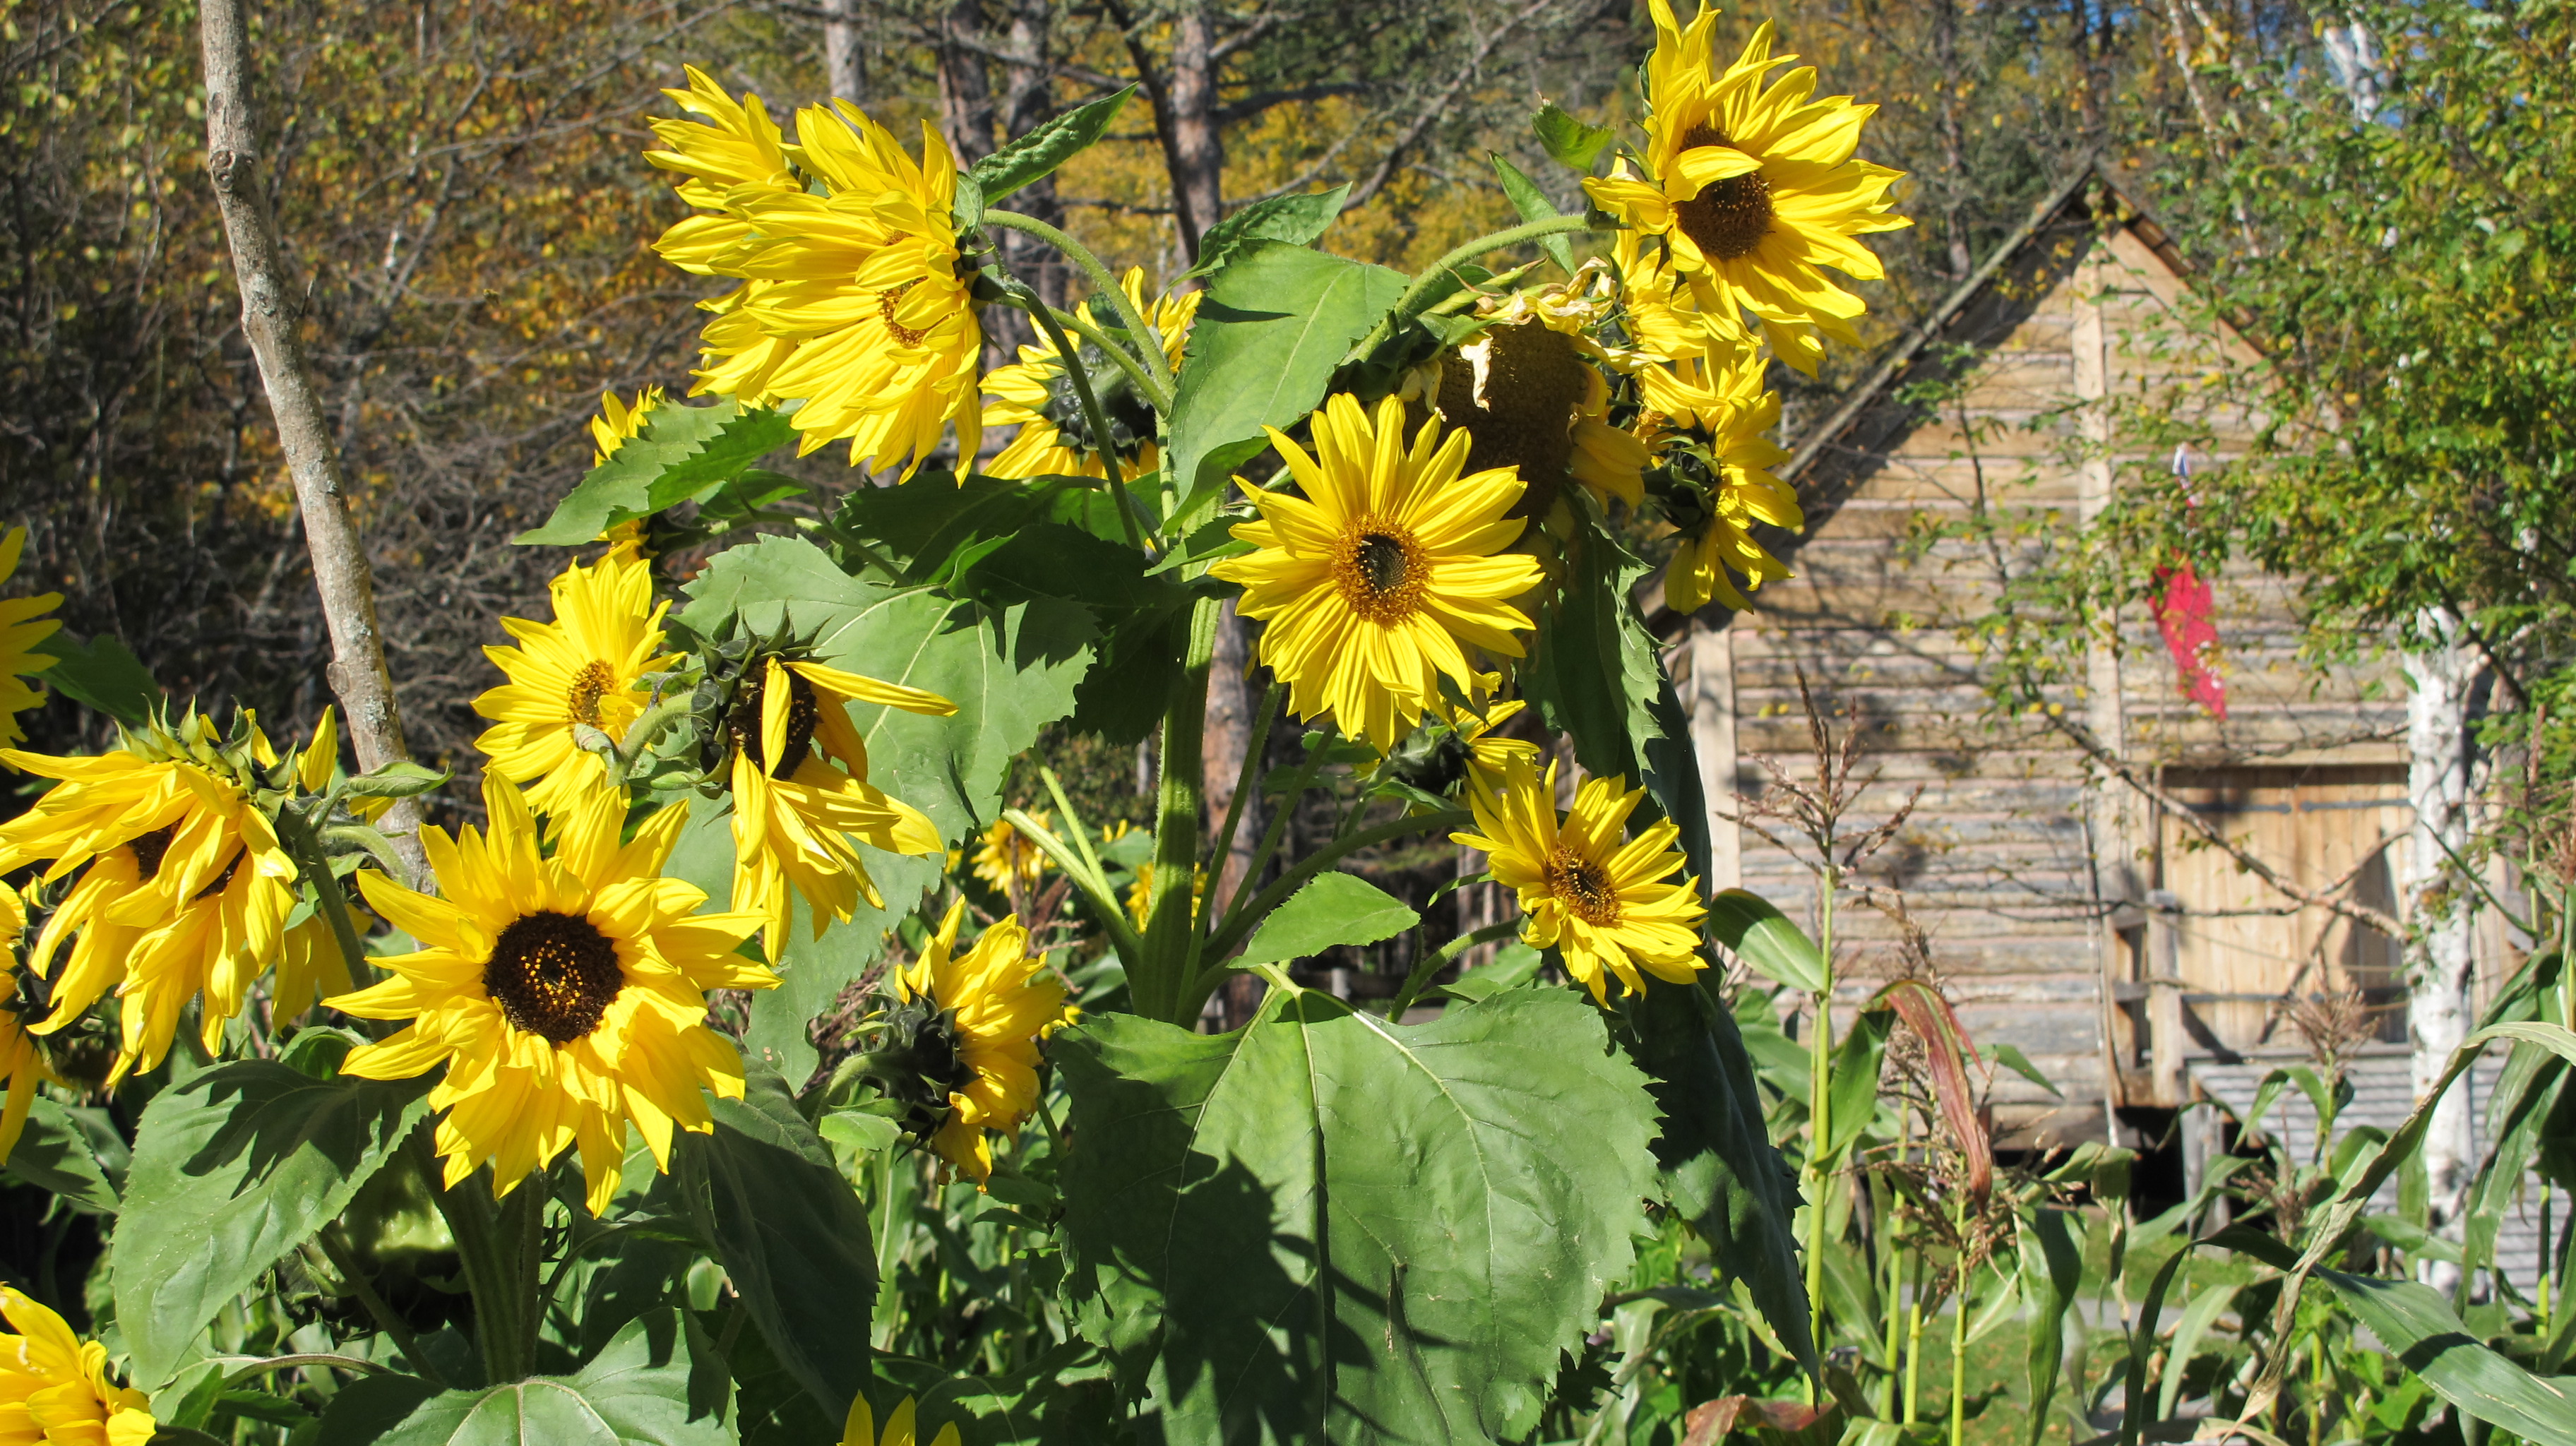 Sunflowers blossoms in front of log building